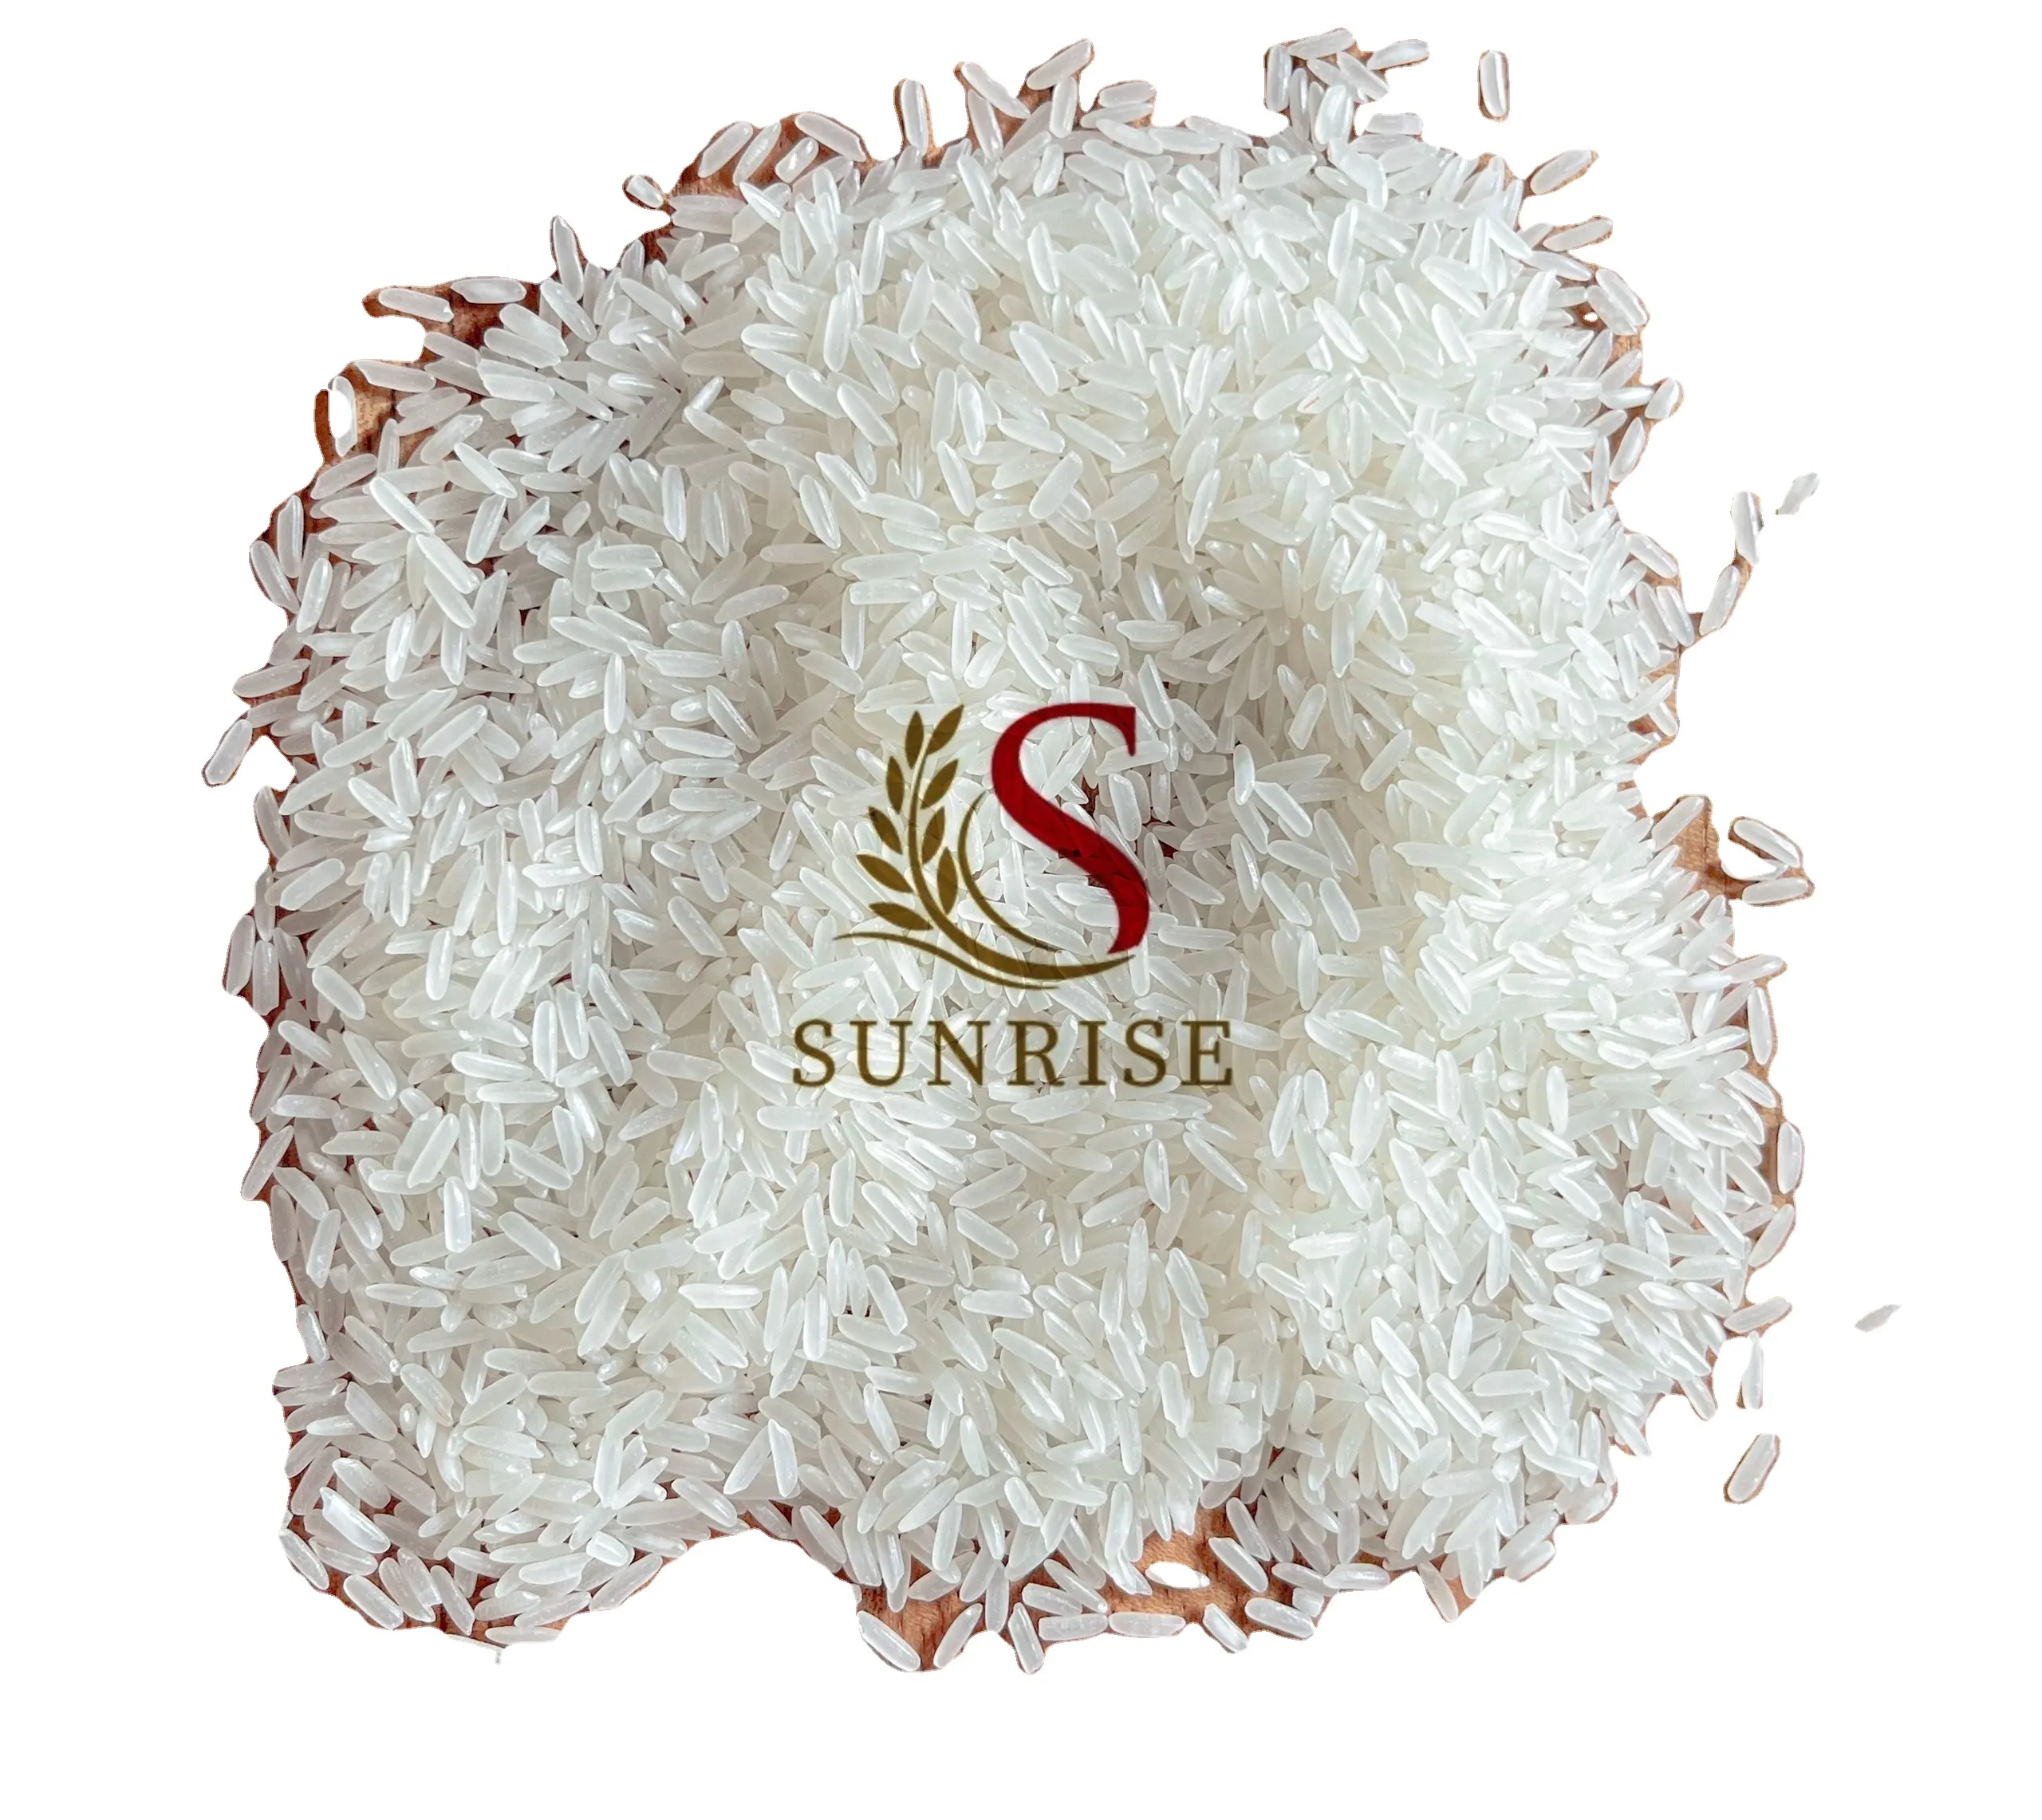 Japanese Japonica rice with 3% broken white rice premium for sushi rice in Vietnam - Linda What.sapp 0084 989 322 607